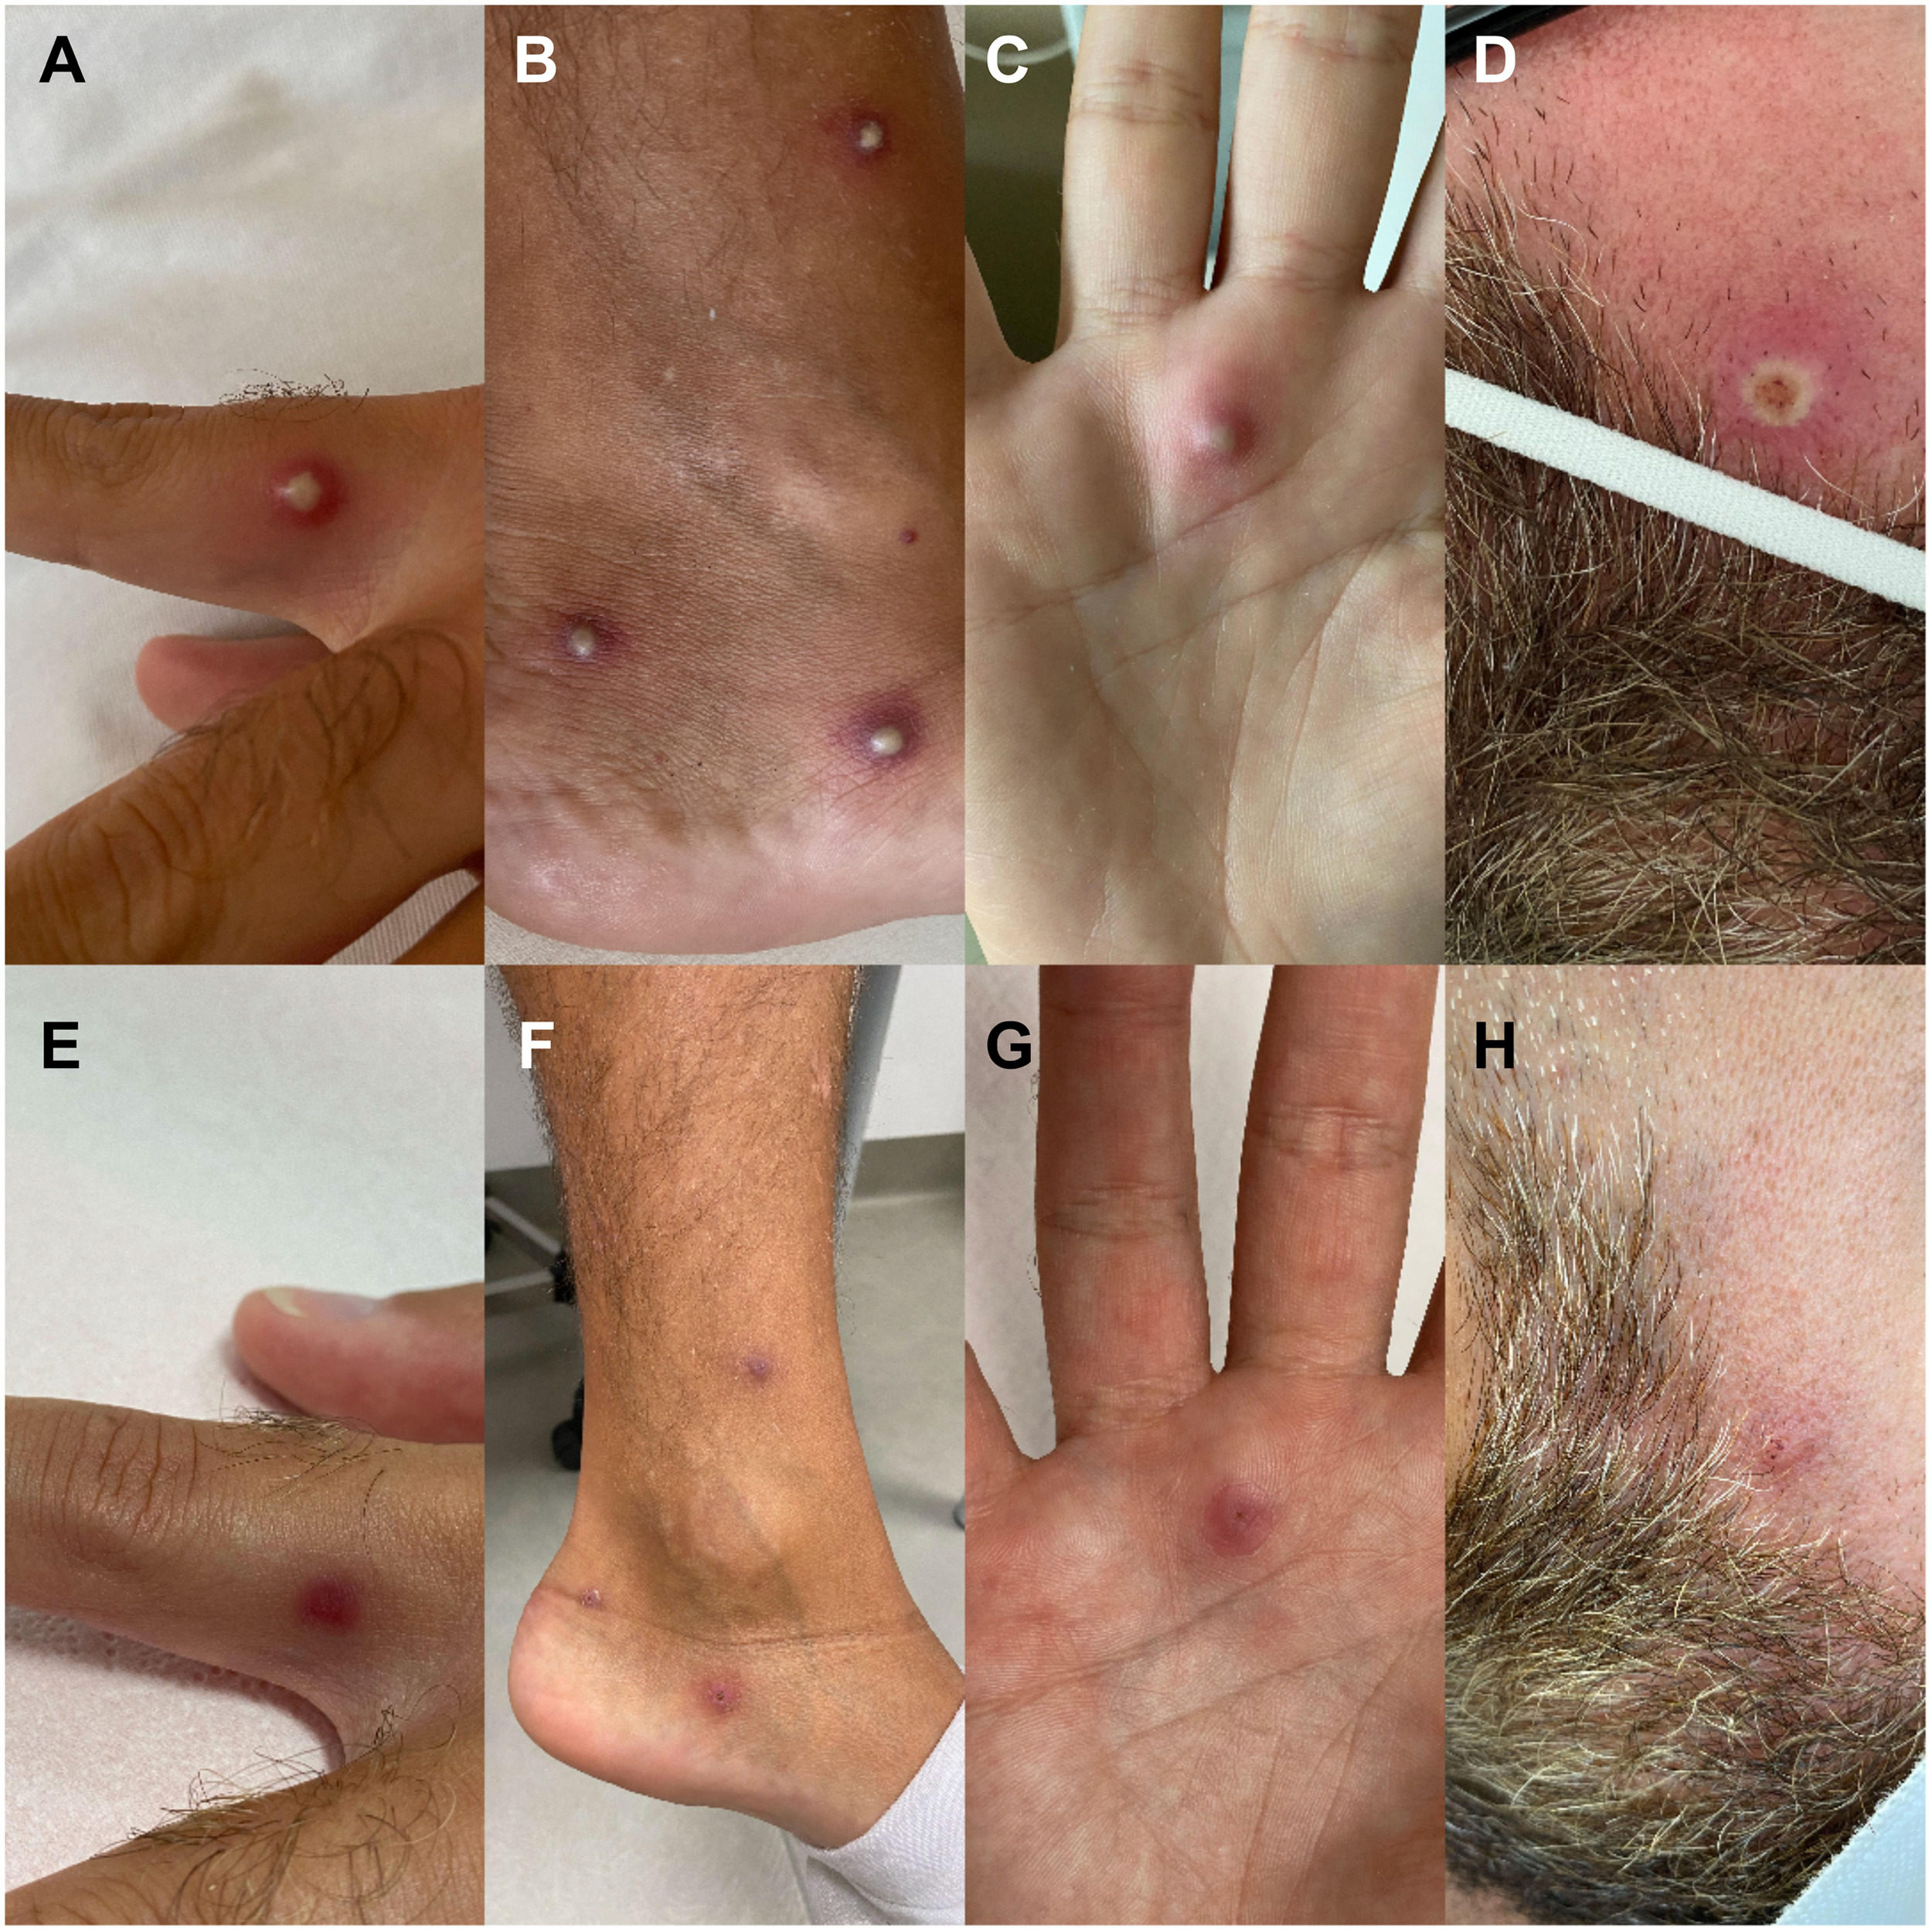 The patient developed small, painful blisters after first breaking out in a rash. Photos: Journal of Infection